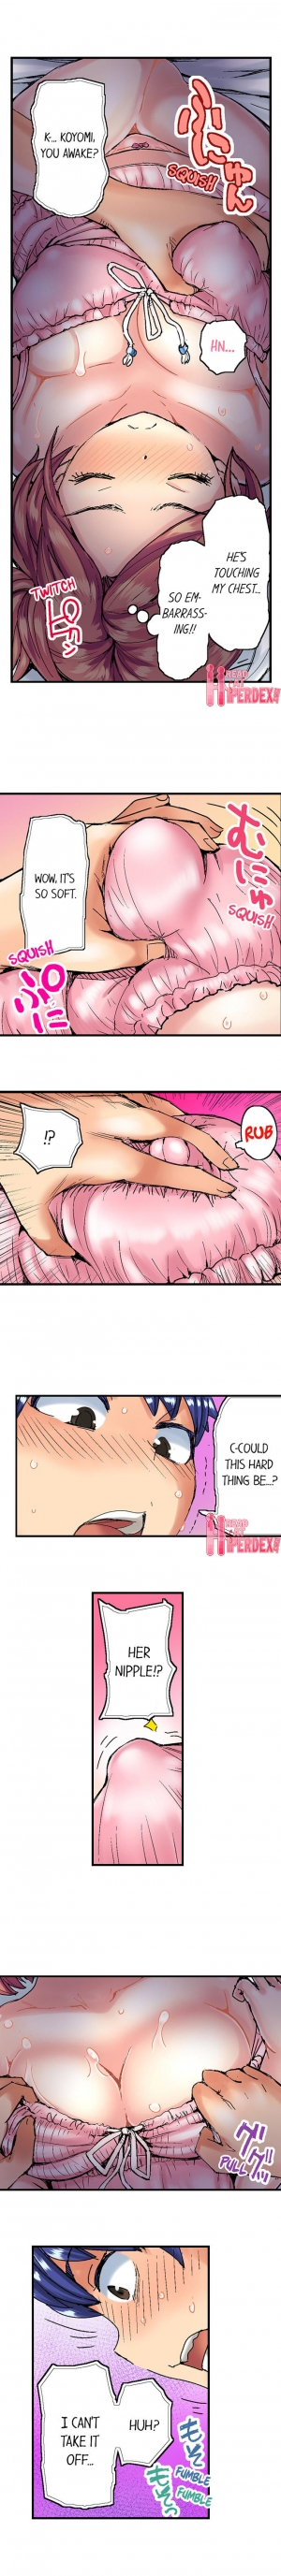 [Hiroyoshi Kira] Taking a Hot Tanned Chick’s Virginity (Ch.1-5) [English] - Page 16